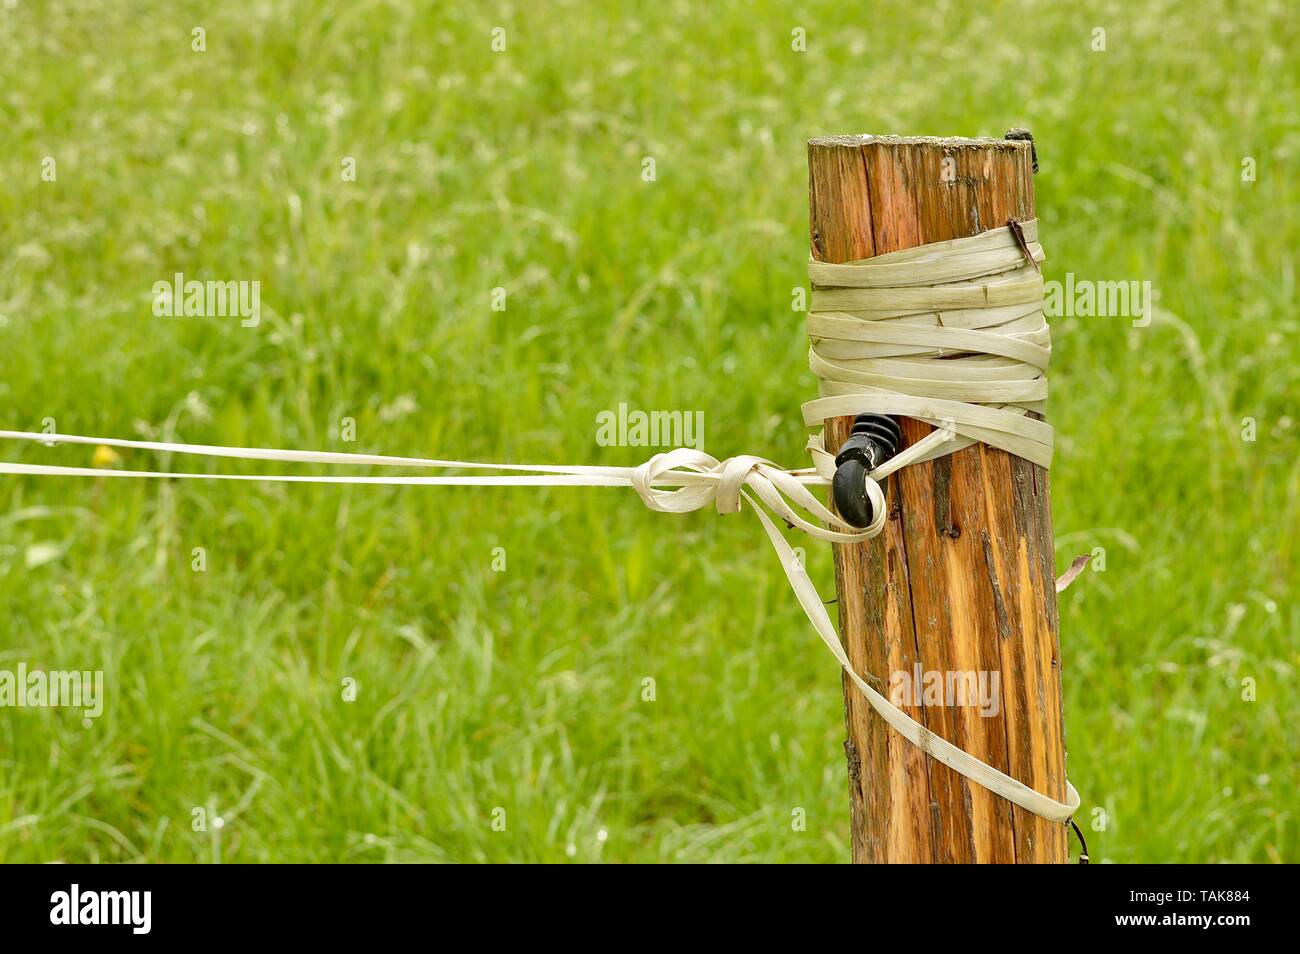 wooden pole holding an electrified fence Stock Photo